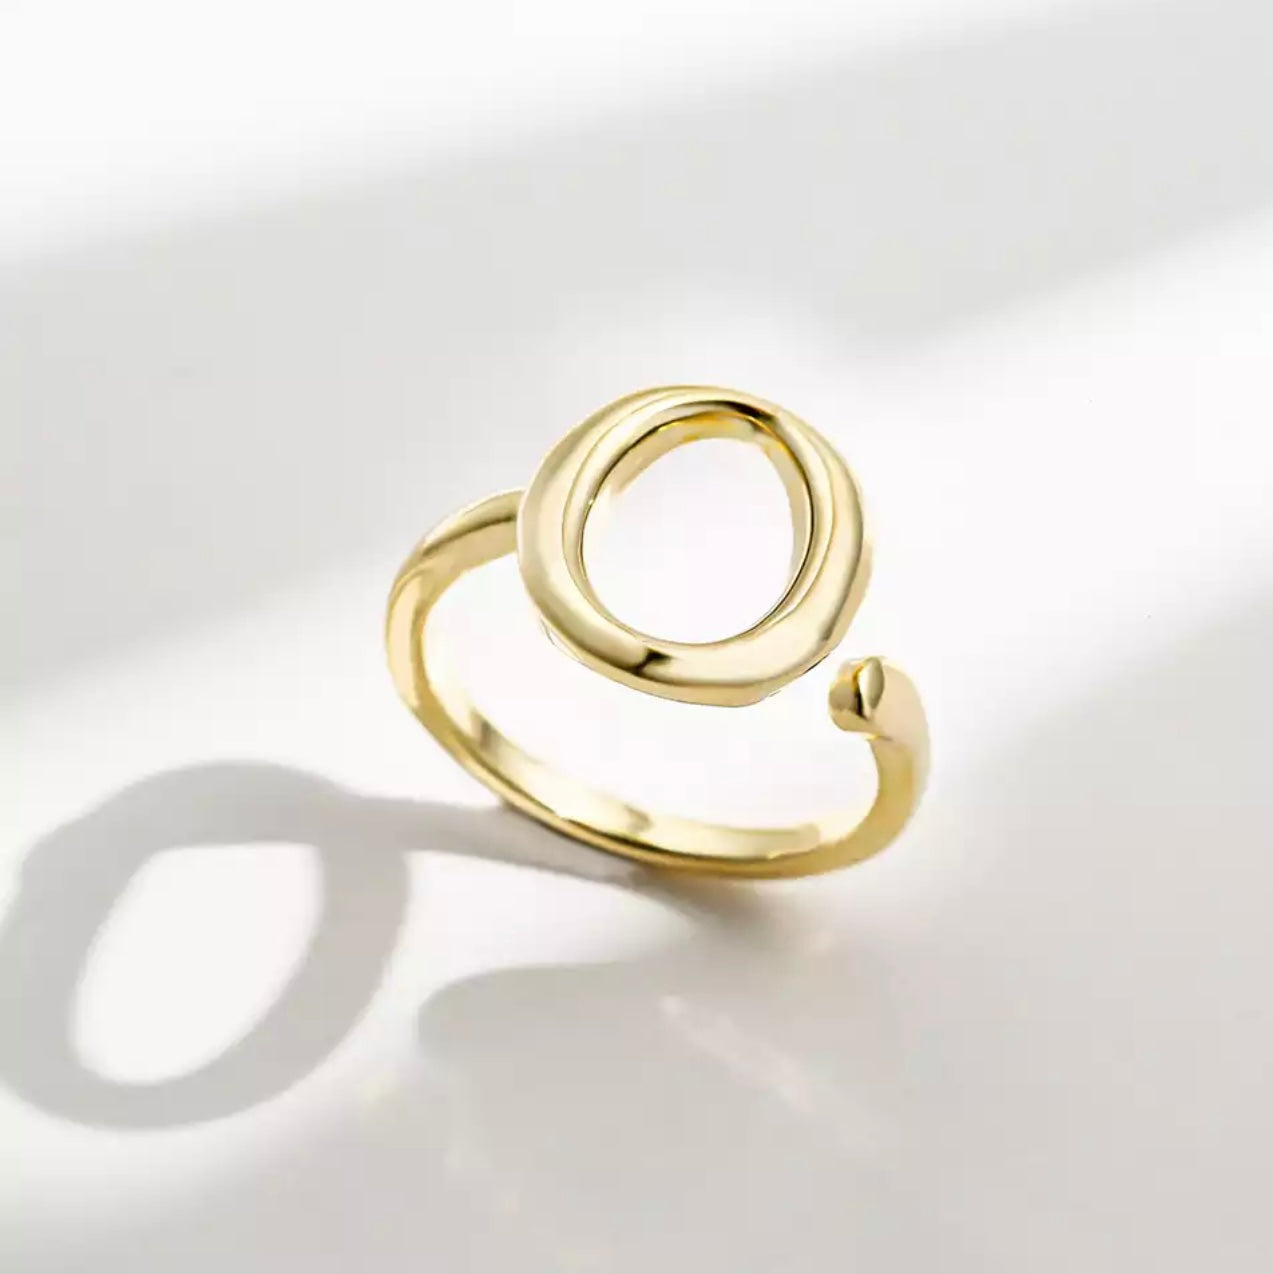 The minimalist Circular sterling silver ring